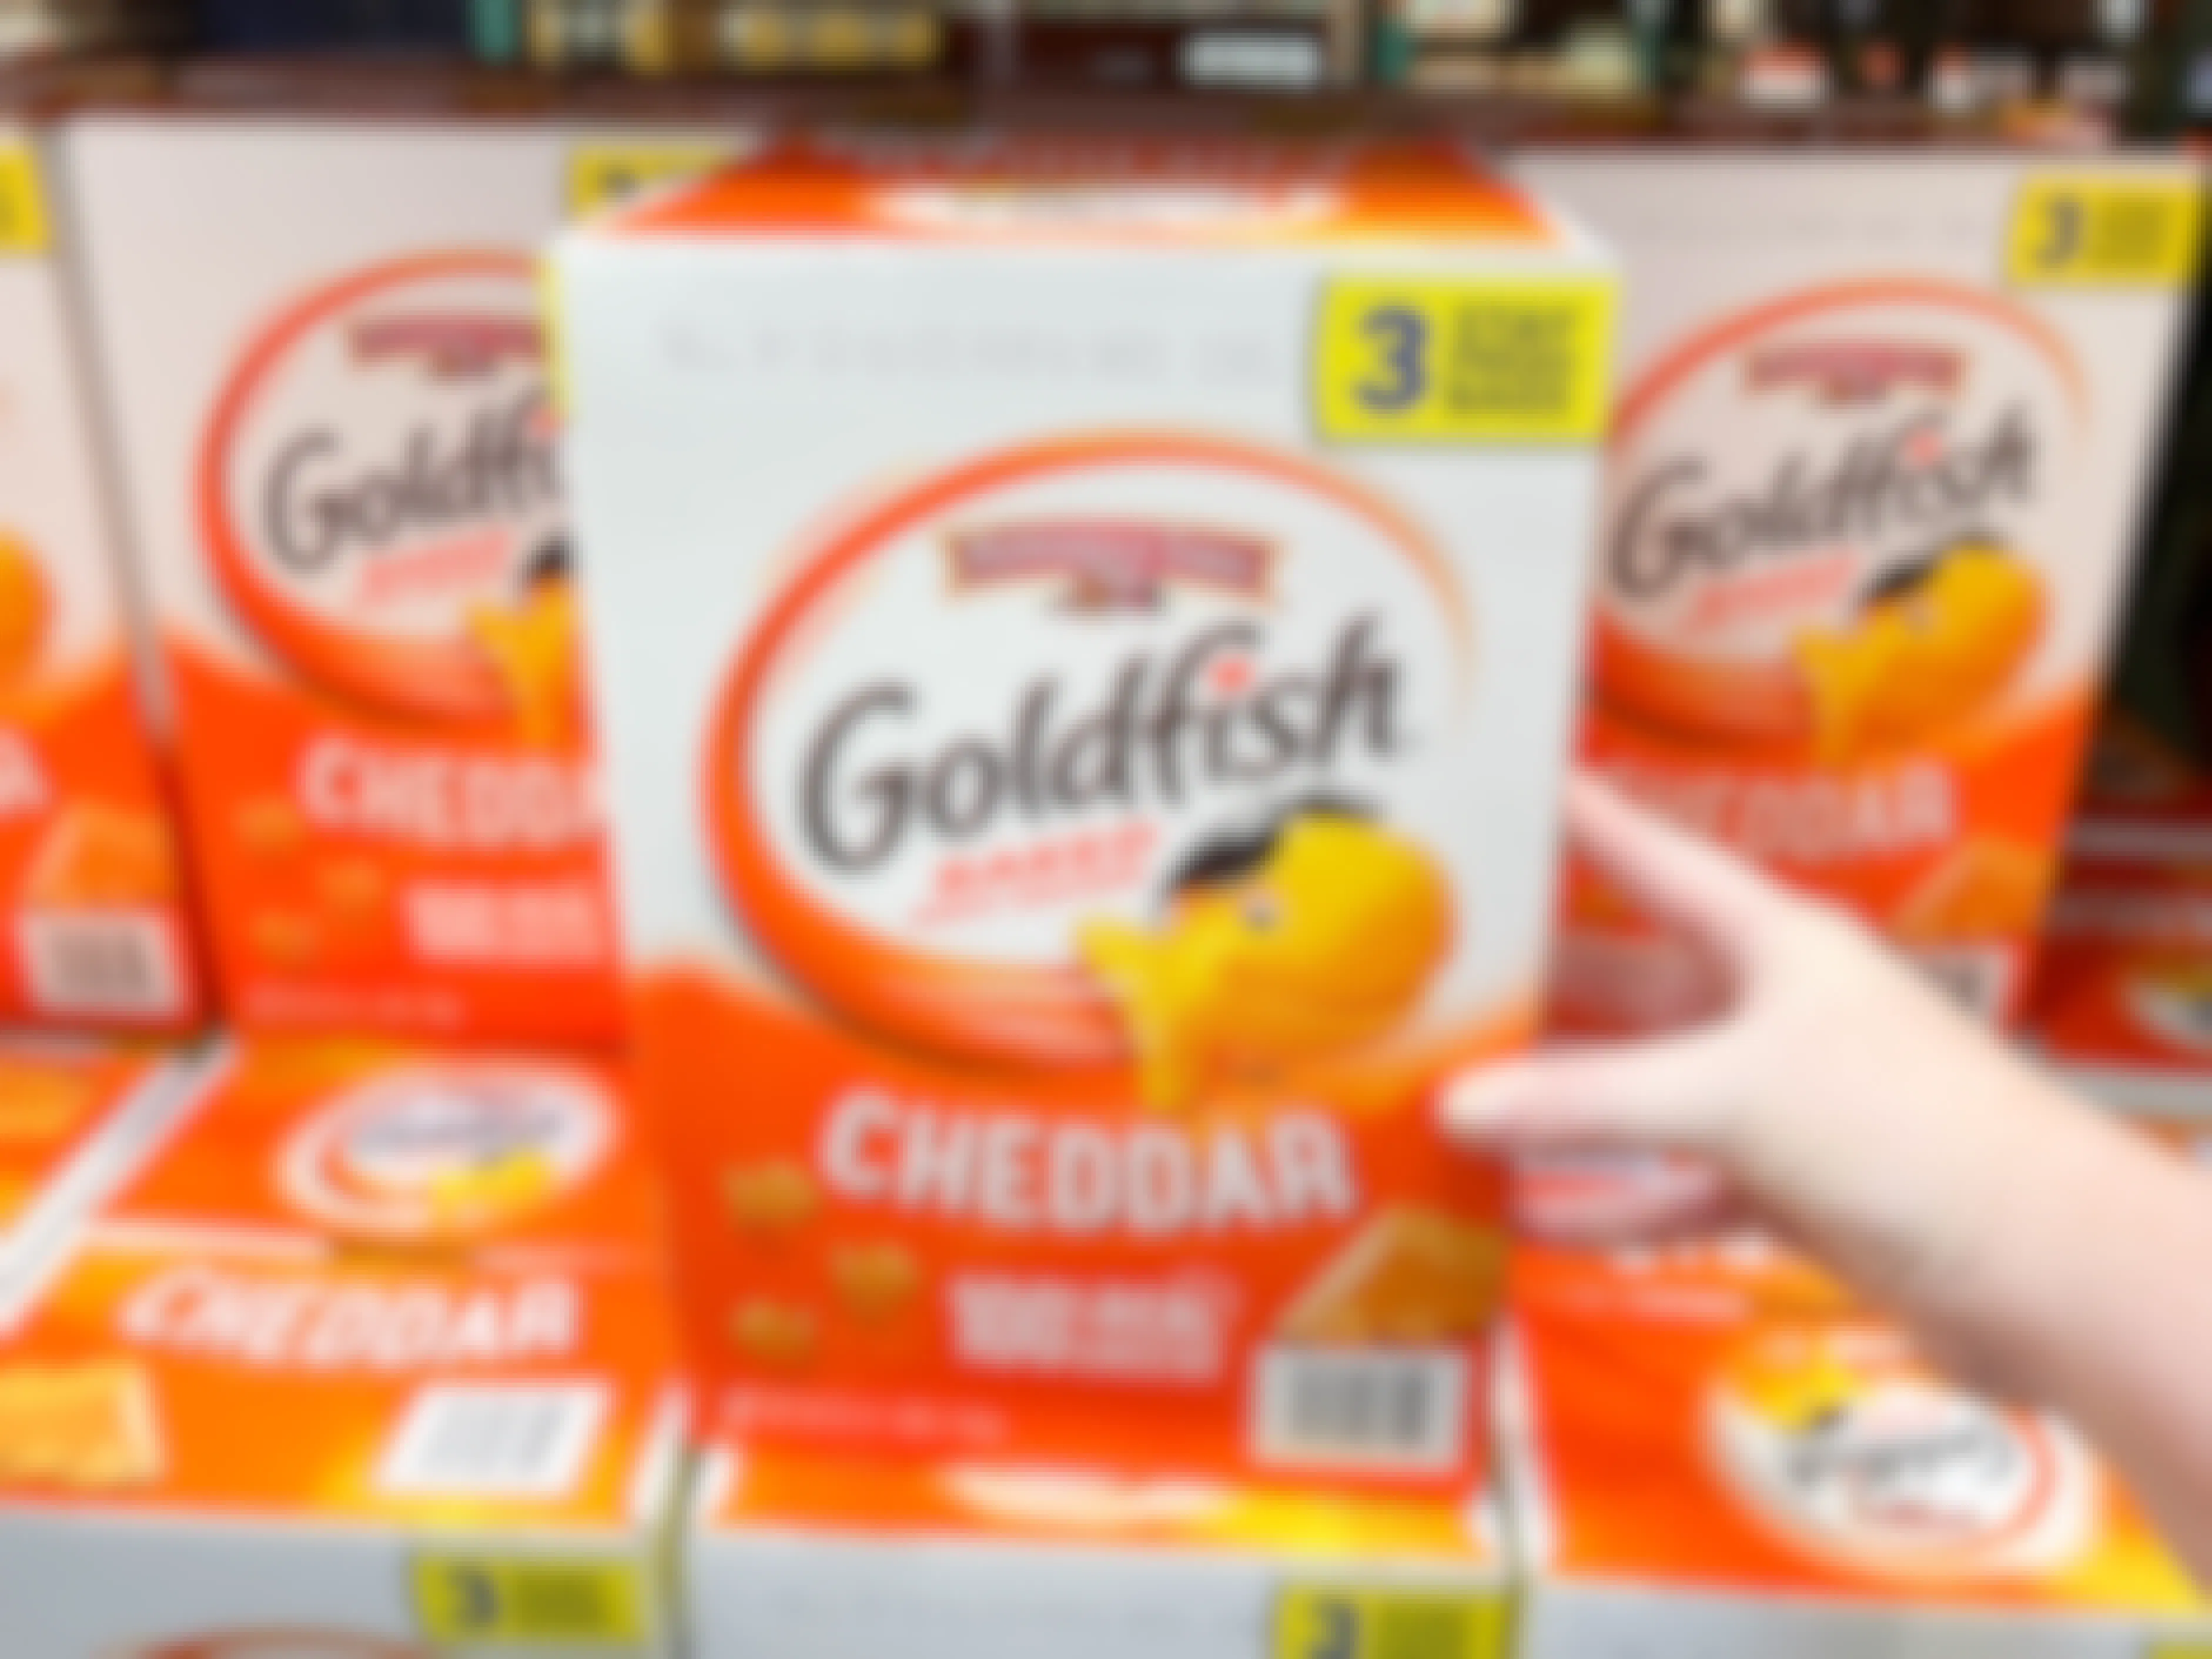 a large box of goldfish crackers being grabbed in store